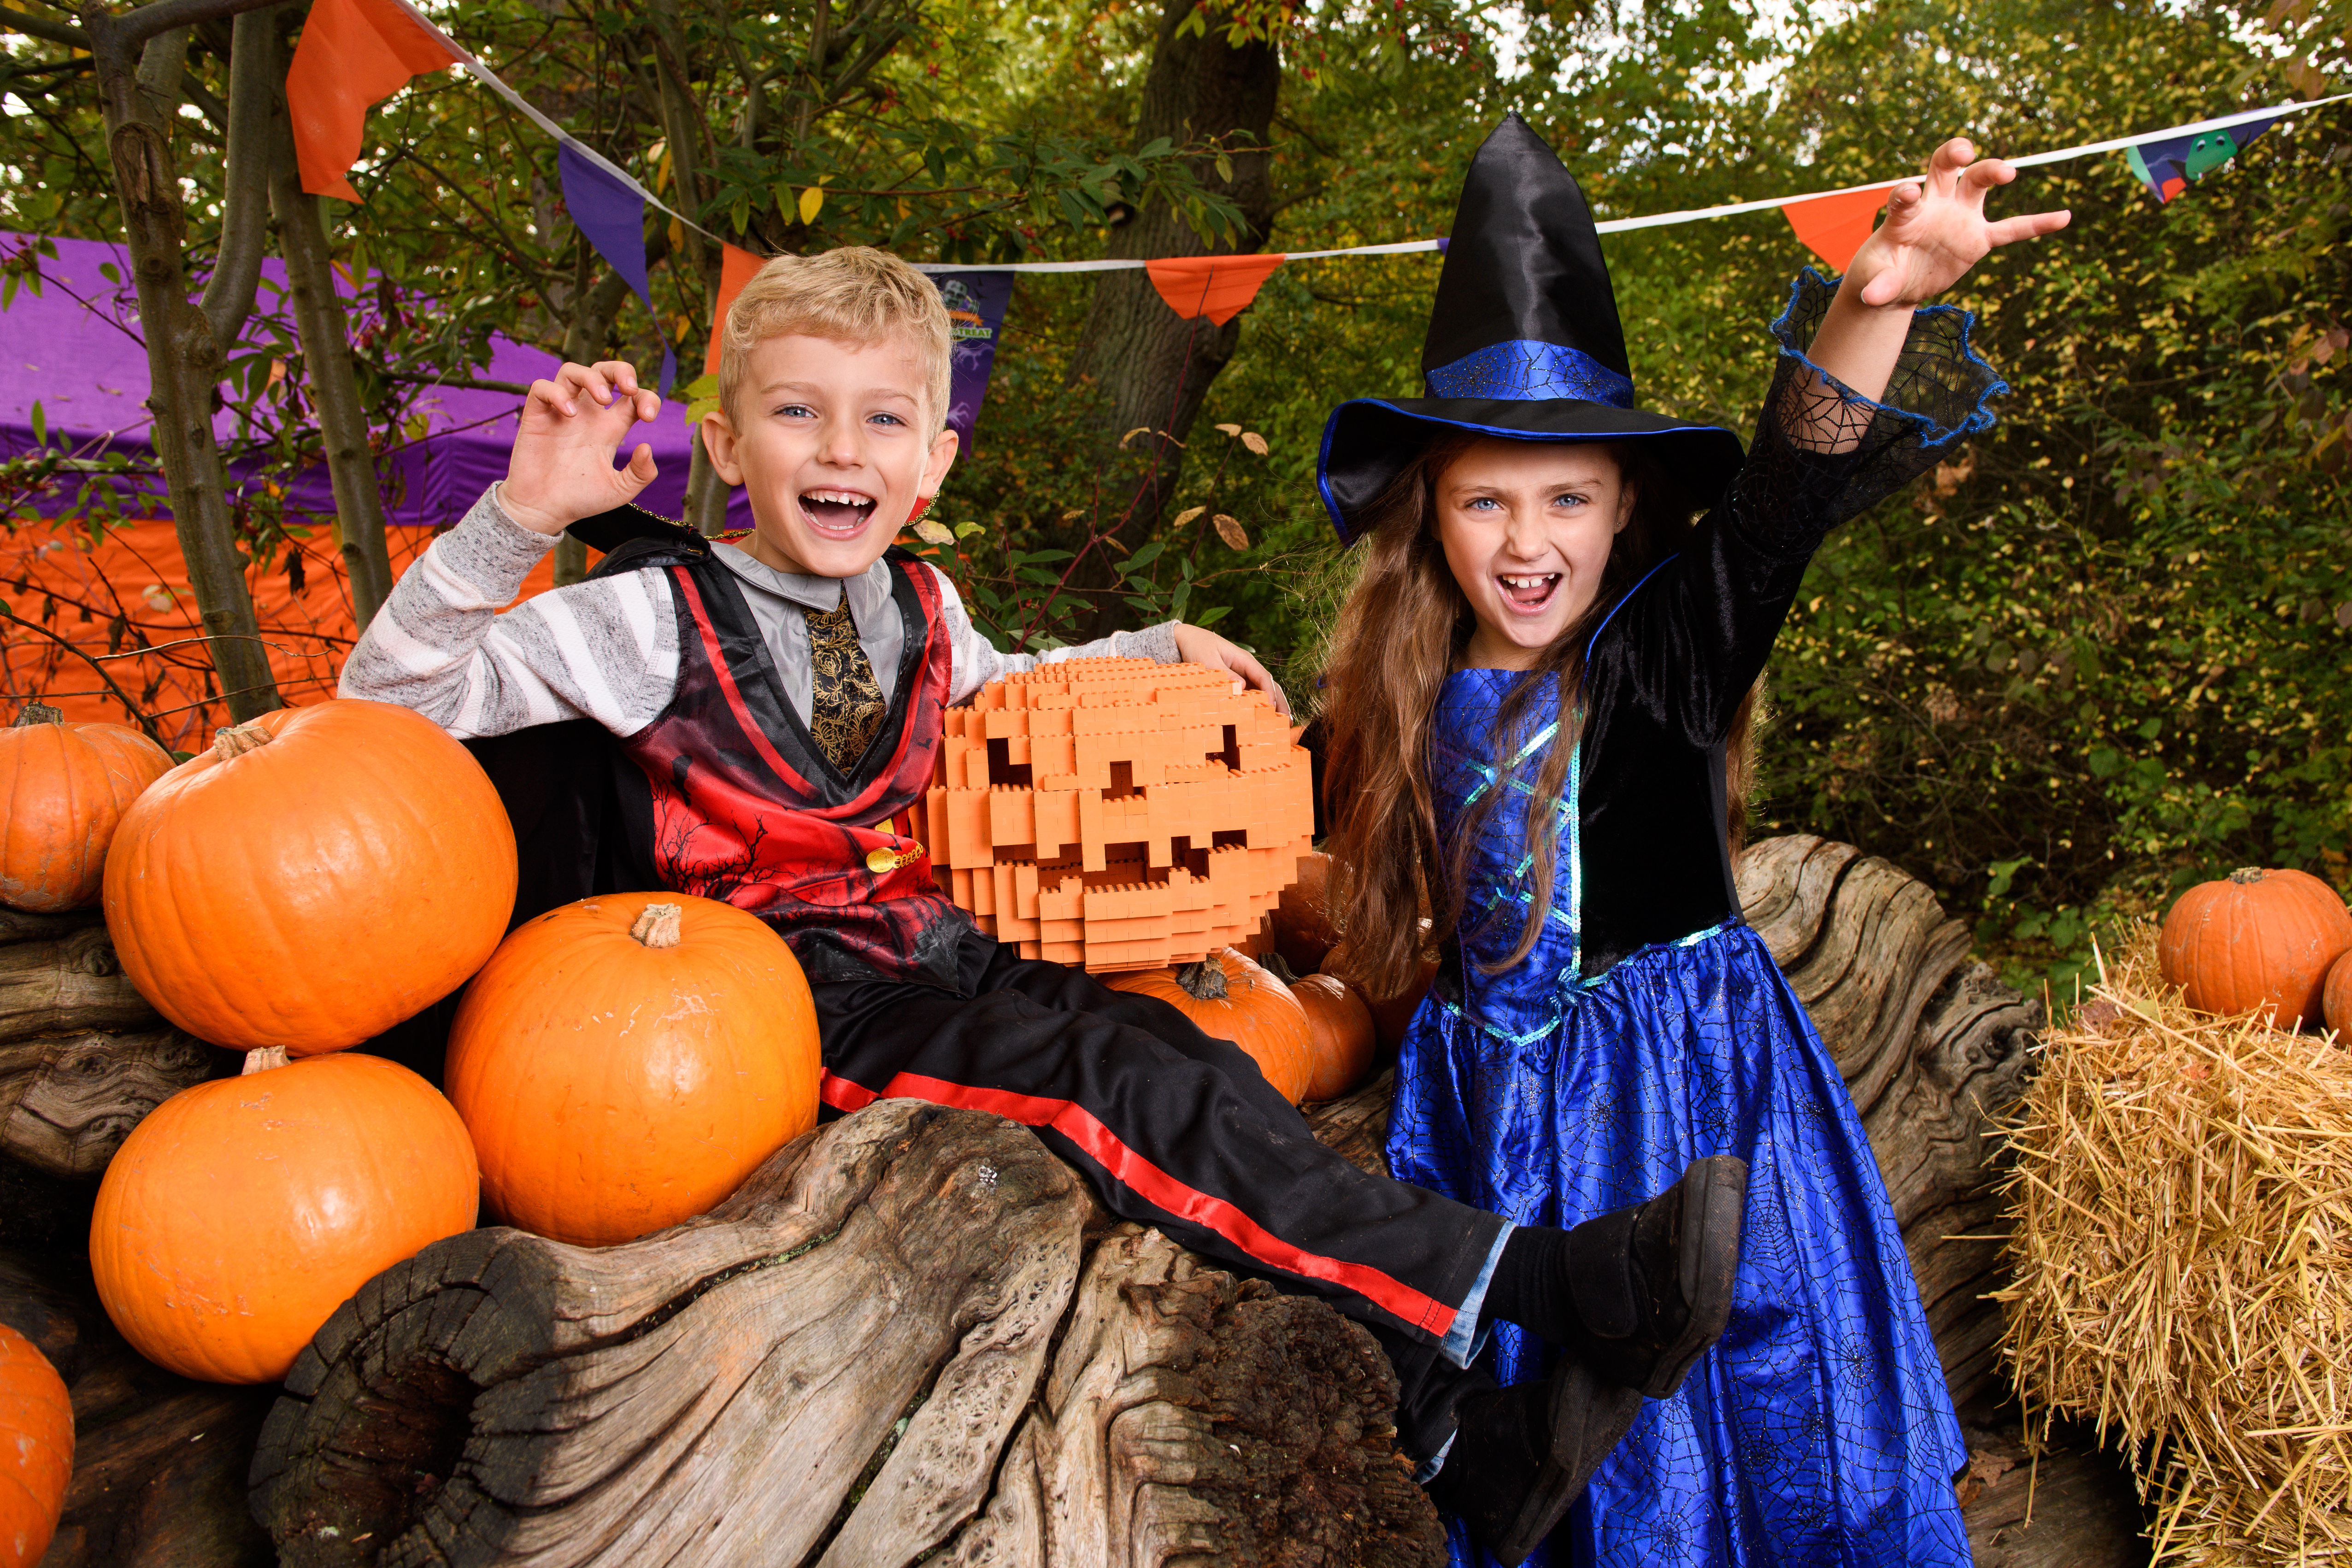 Children in Halloween costumes with LEGO pumpkin in the Enchanted Forest pumpkin patch during Brick or Treat at the LEGOLAND Windsor Resort